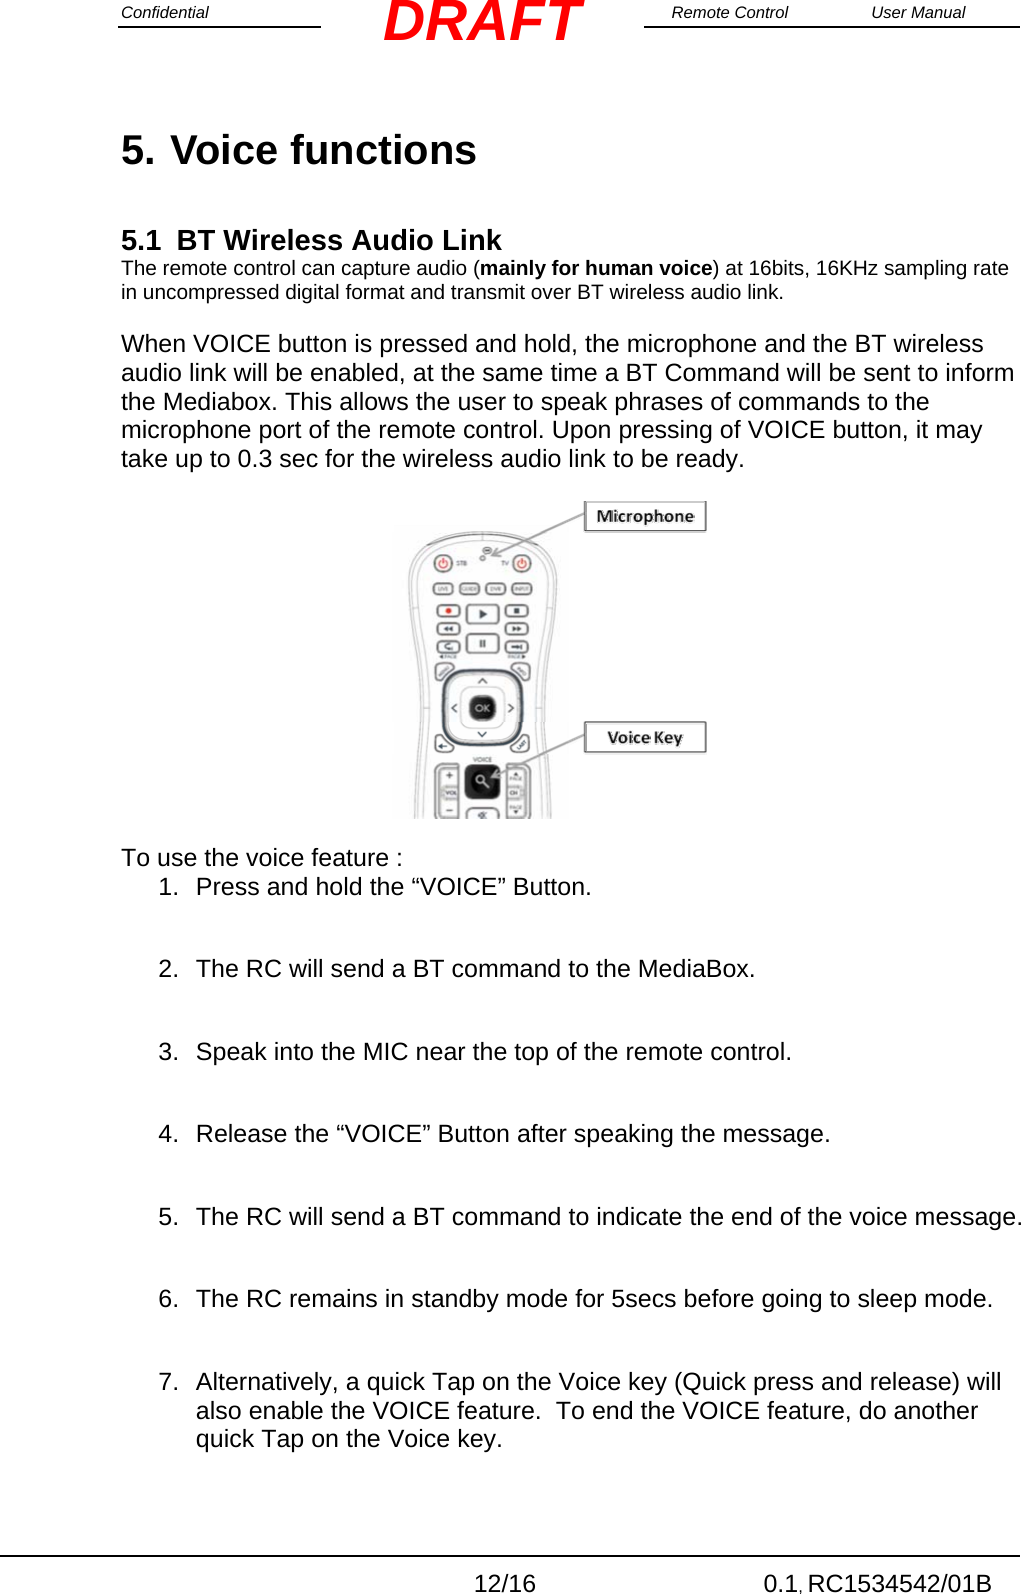 Confidential                                                                                                    Remote Control  User Manual  12/16 0.1, RC1534542/01B DRAFT5. Voice functions 5.1  BT Wireless Audio Link The remote control can capture audio (mainly for human voice) at 16bits, 16KHz sampling rate in uncompressed digital format and transmit over BT wireless audio link.  When VOICE button is pressed and hold, the microphone and the BT wireless audio link will be enabled, at the same time a BT Command will be sent to inform the Mediabox. This allows the user to speak phrases of commands to the microphone port of the remote control. Upon pressing of VOICE button, it may take up to 0.3 sec for the wireless audio link to be ready.                                                      To use the voice feature :                                  1.  Press and hold the “VOICE” Button.    2.  The RC will send a BT command to the MediaBox.  3.  Speak into the MIC near the top of the remote control.  4.  Release the “VOICE” Button after speaking the message.  5.  The RC will send a BT command to indicate the end of the voice message.  6.  The RC remains in standby mode for 5secs before going to sleep mode.  7.  Alternatively, a quick Tap on the Voice key (Quick press and release) will also enable the VOICE feature.  To end the VOICE feature, do another quick Tap on the Voice key.  